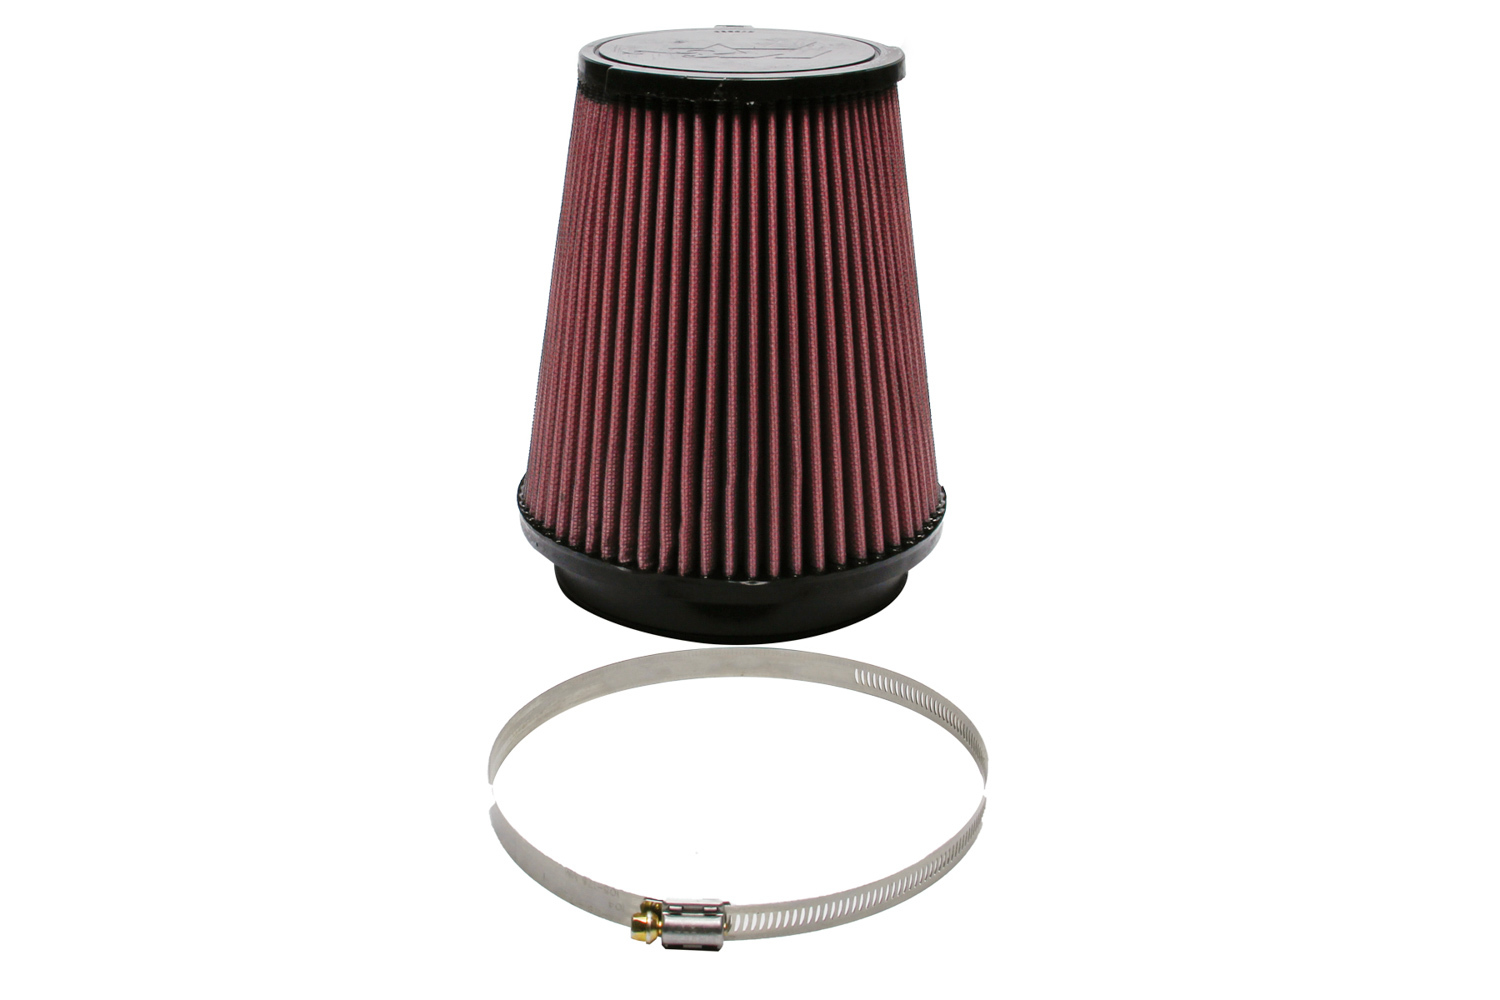 K & N Air Filter Element, Conical, 7/1/4" Base Dia. 5-5/16" Top Dia. 7-15/16" Tall, Reusable Cotton, Ford Modular, S